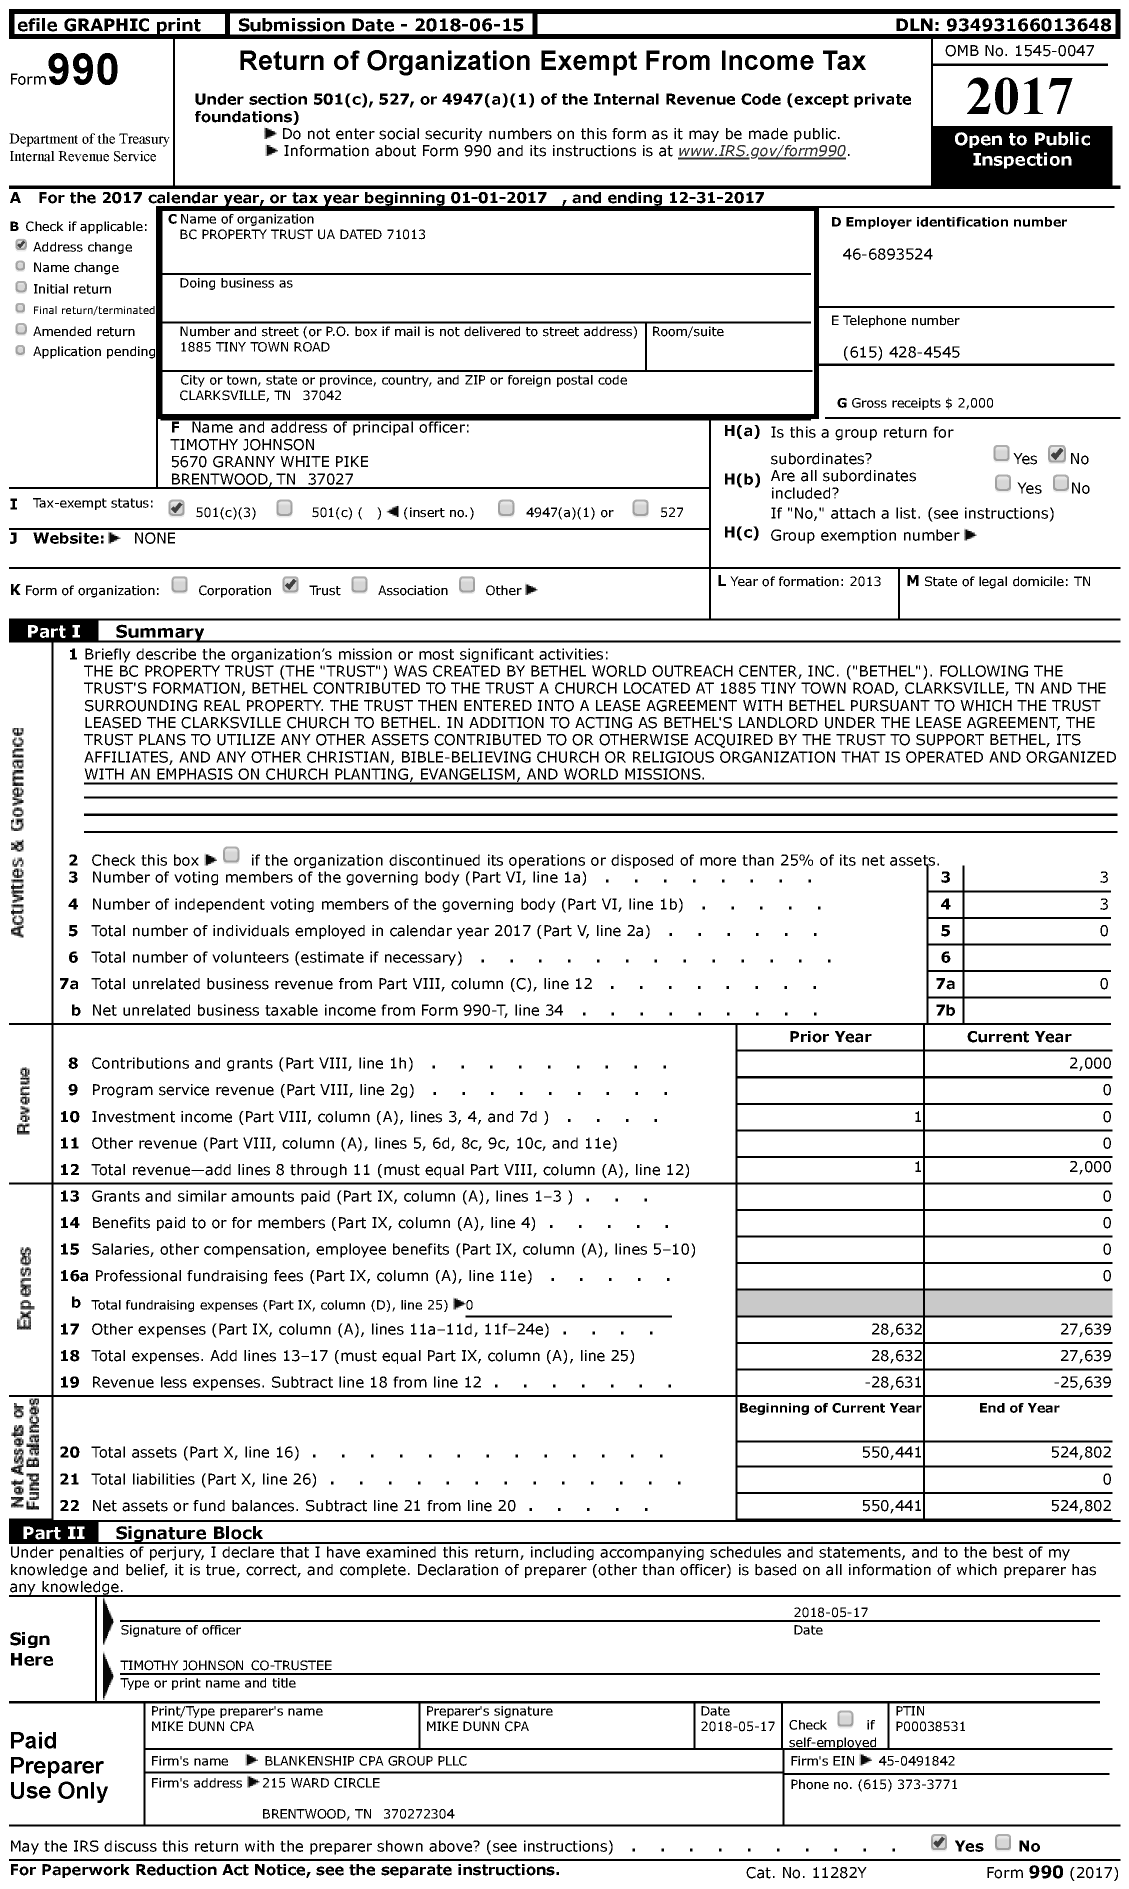 Image of first page of 2017 Form 990 for BC Property Trust Dated 71013